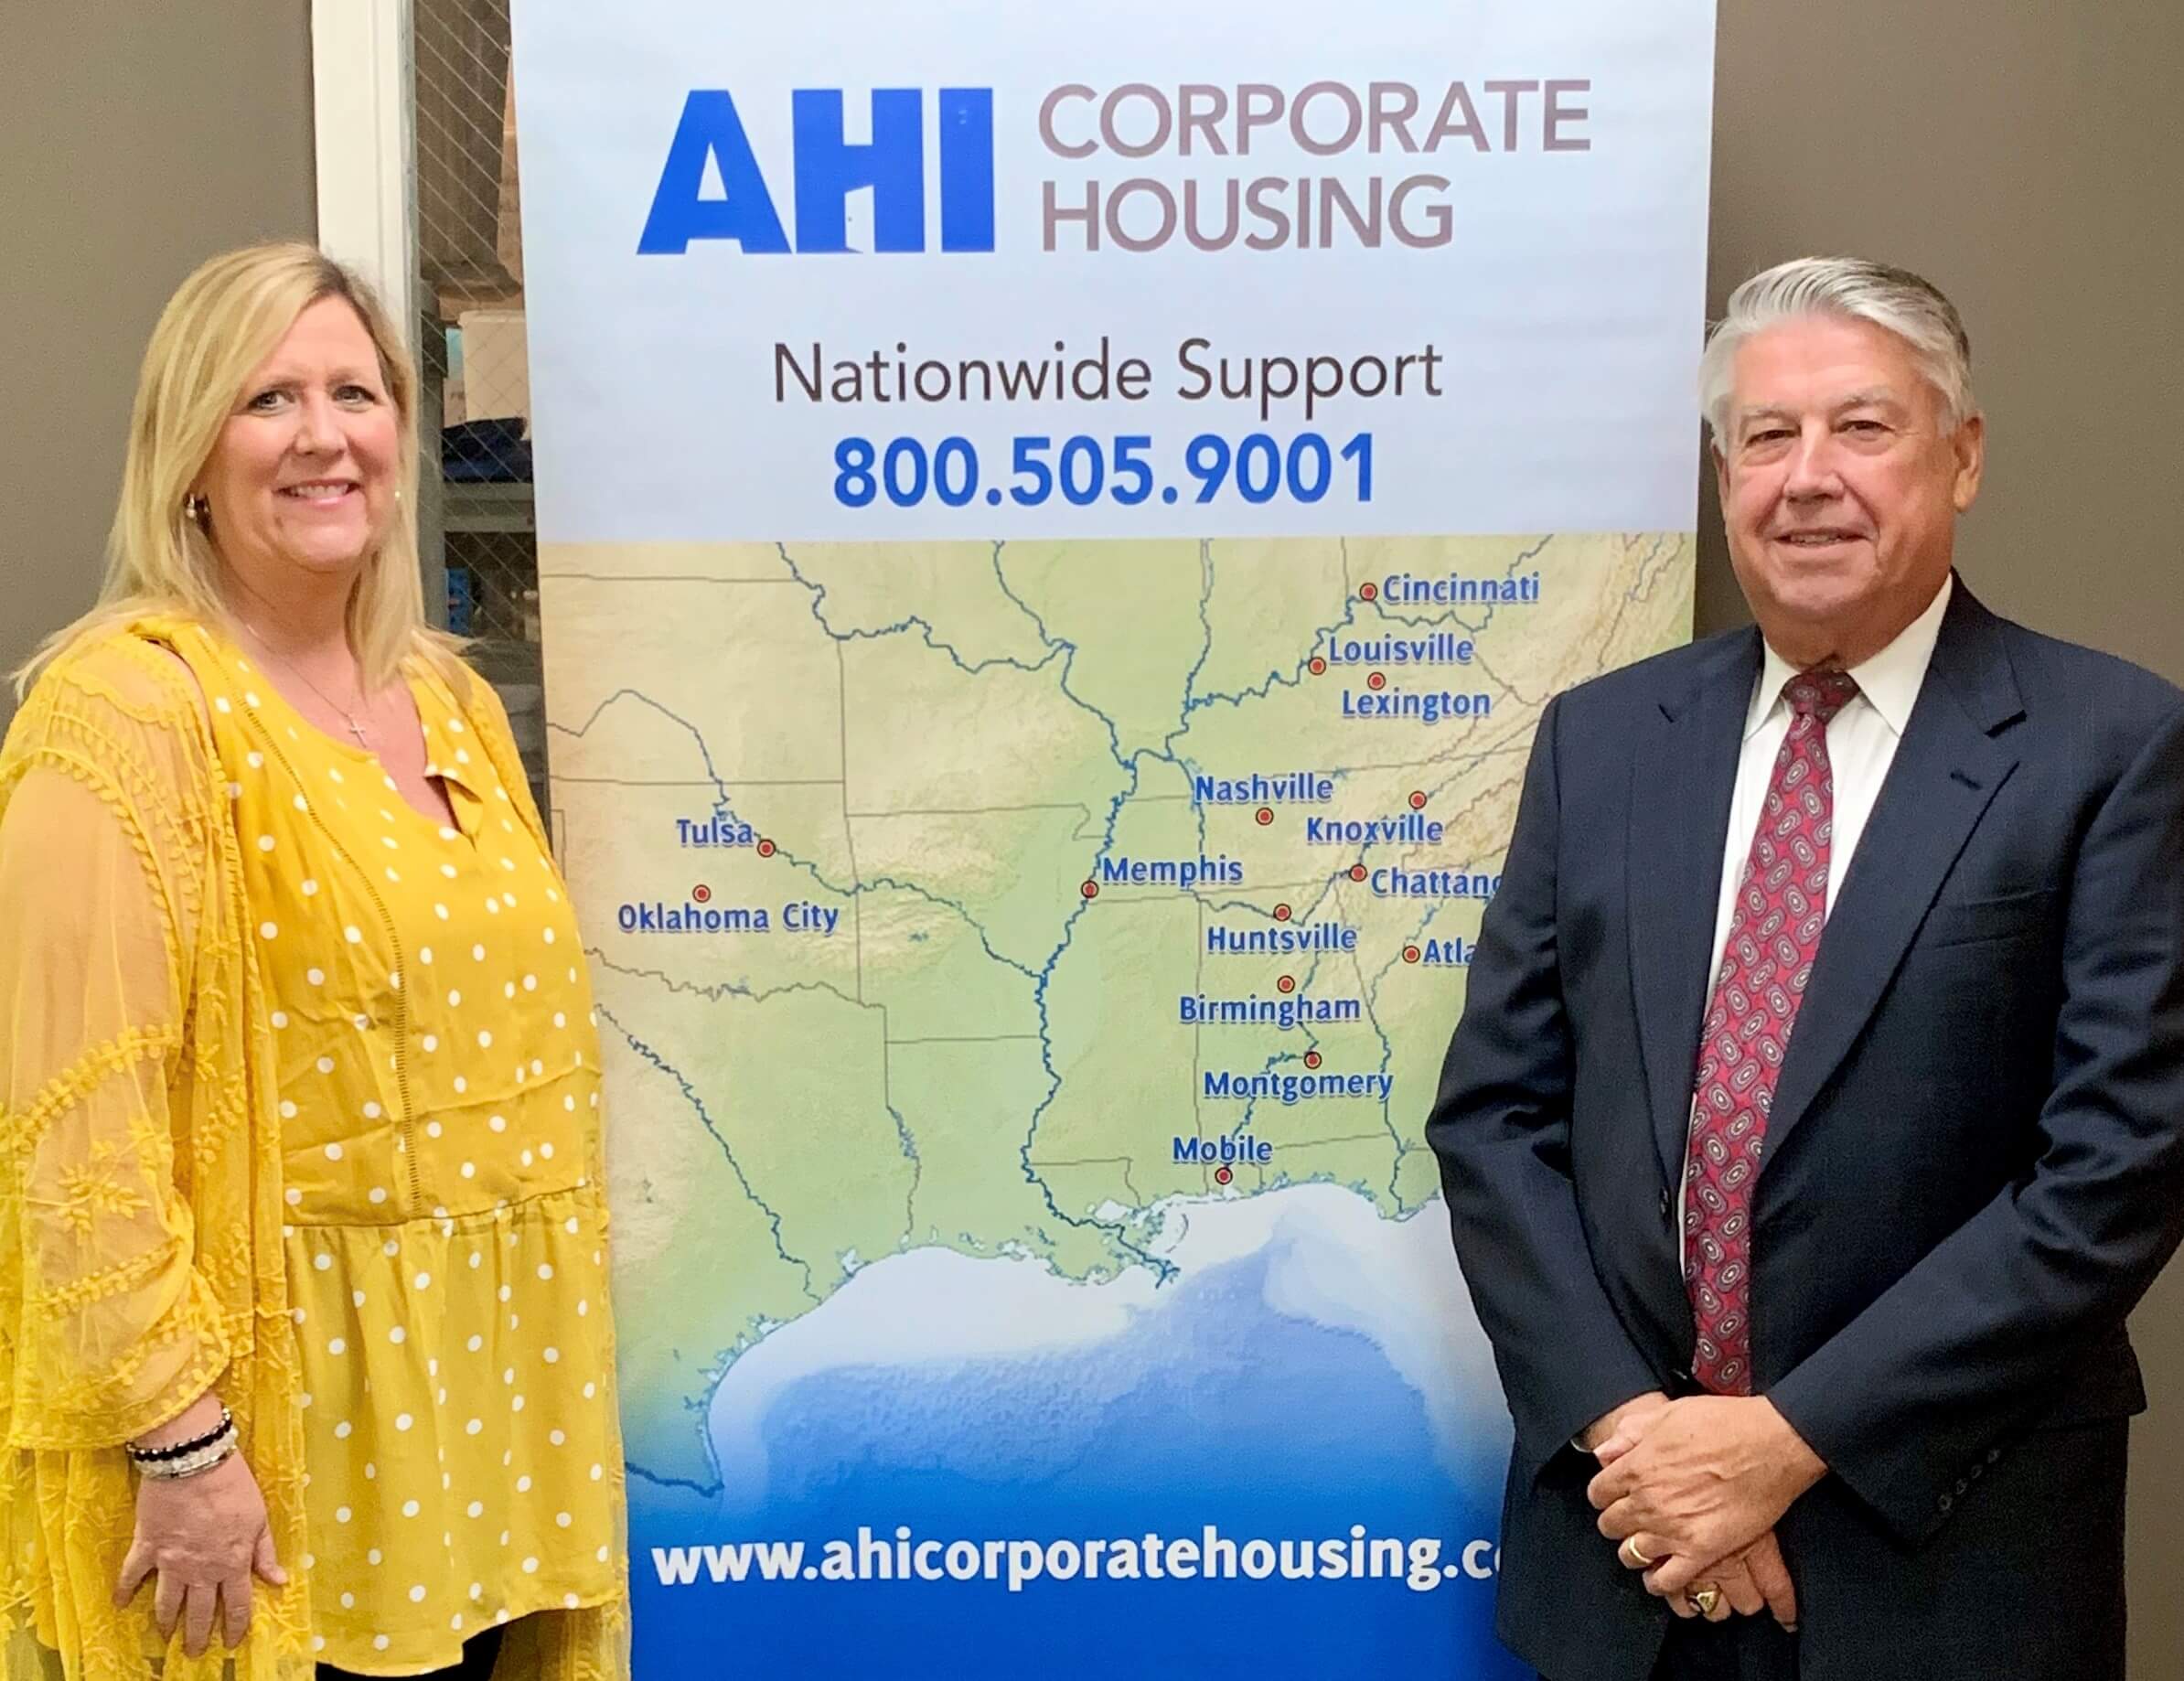 AHI CELEBRATES 30 YEARS IN THE CORPORATE HOUSING INDUSTRY